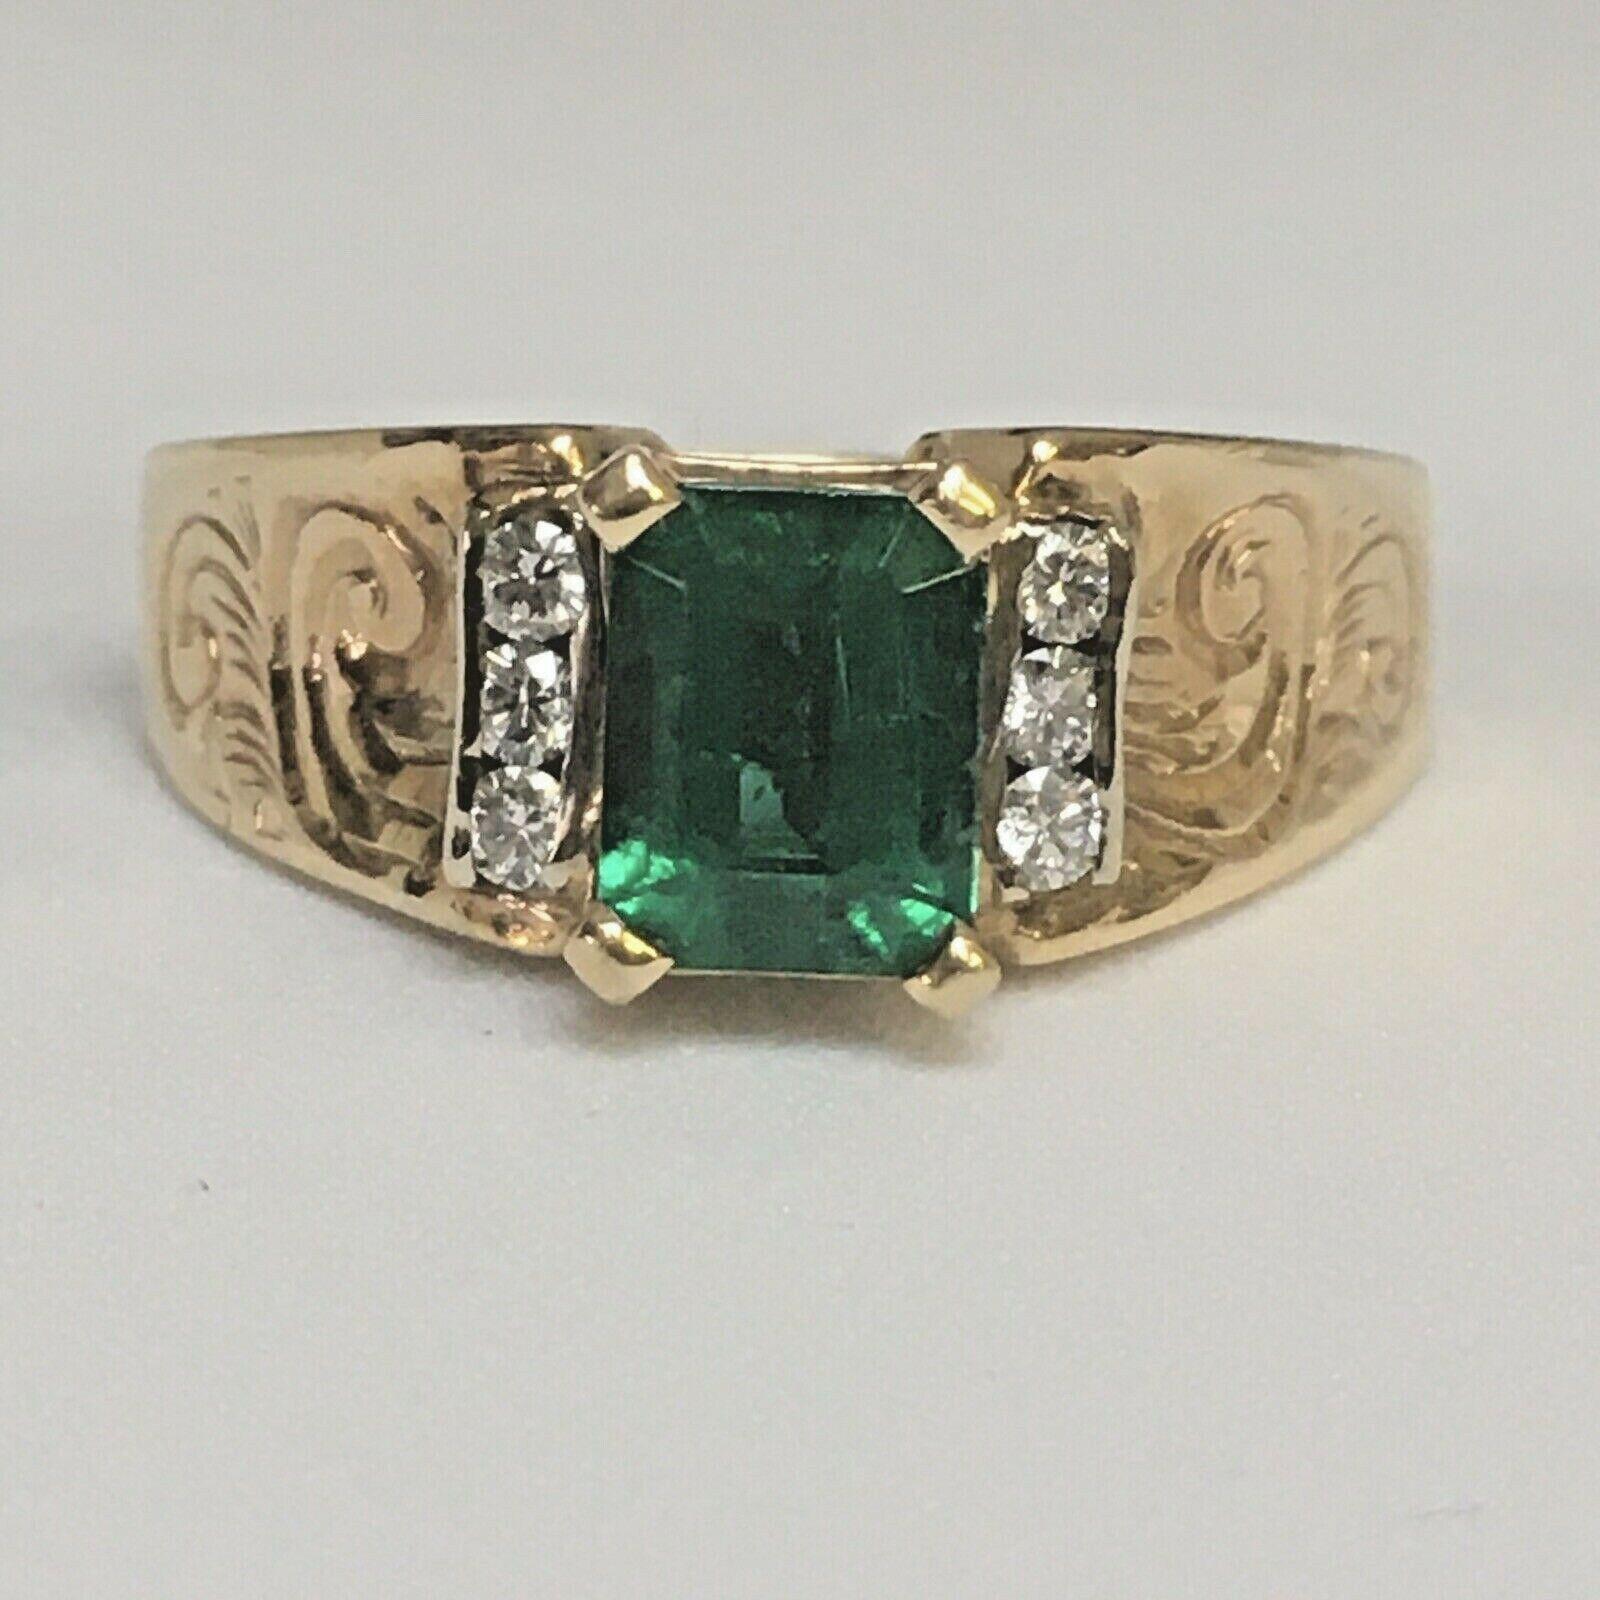 Antique 1940s 1.75 Carat Natural Columbian Emerald 14k Gold Diamond Ring   

Size 11
Weighing 8.0 gram
In fair condition considering 80 years of age, see pictures
Natural Emerald cut 7.8X 6.7 X 4.7 mm Emerald  appx weight of 1.75 Carat, natural